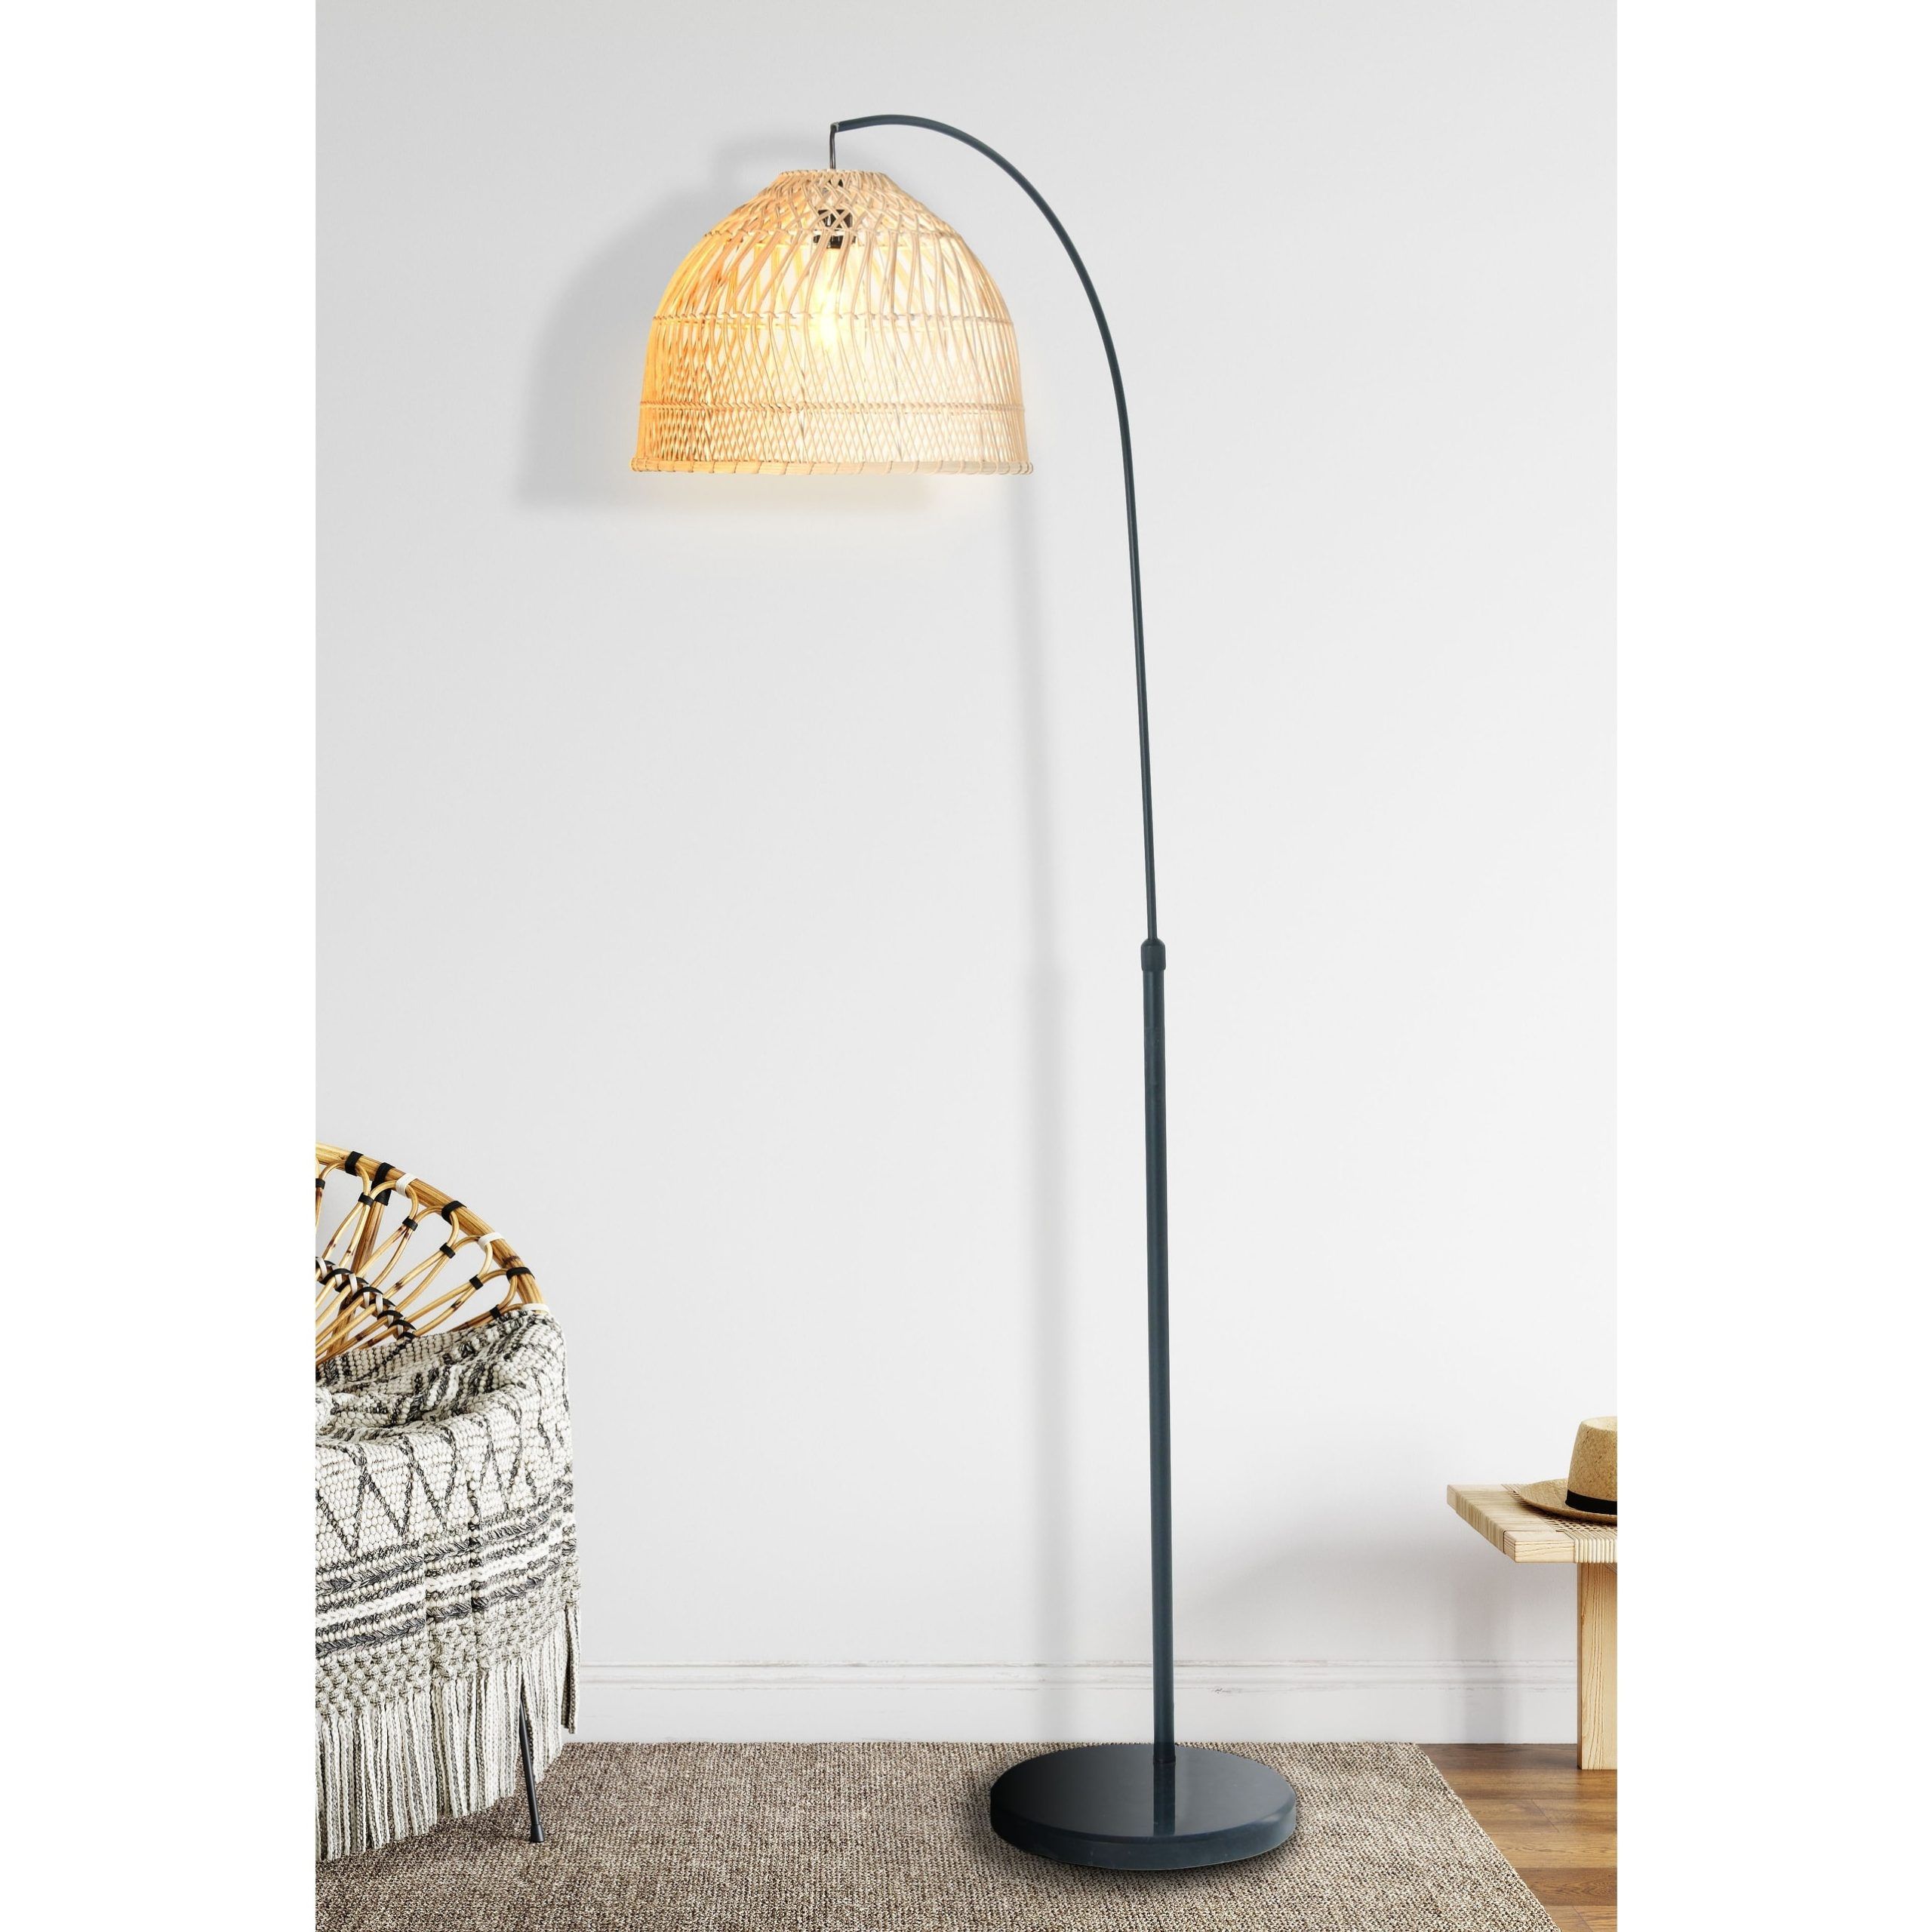 Arched Floor Lamp With Woven Rattan Shade – Overstock – 33638559 With Regard To Woven Cane Floor Lamps (View 8 of 20)